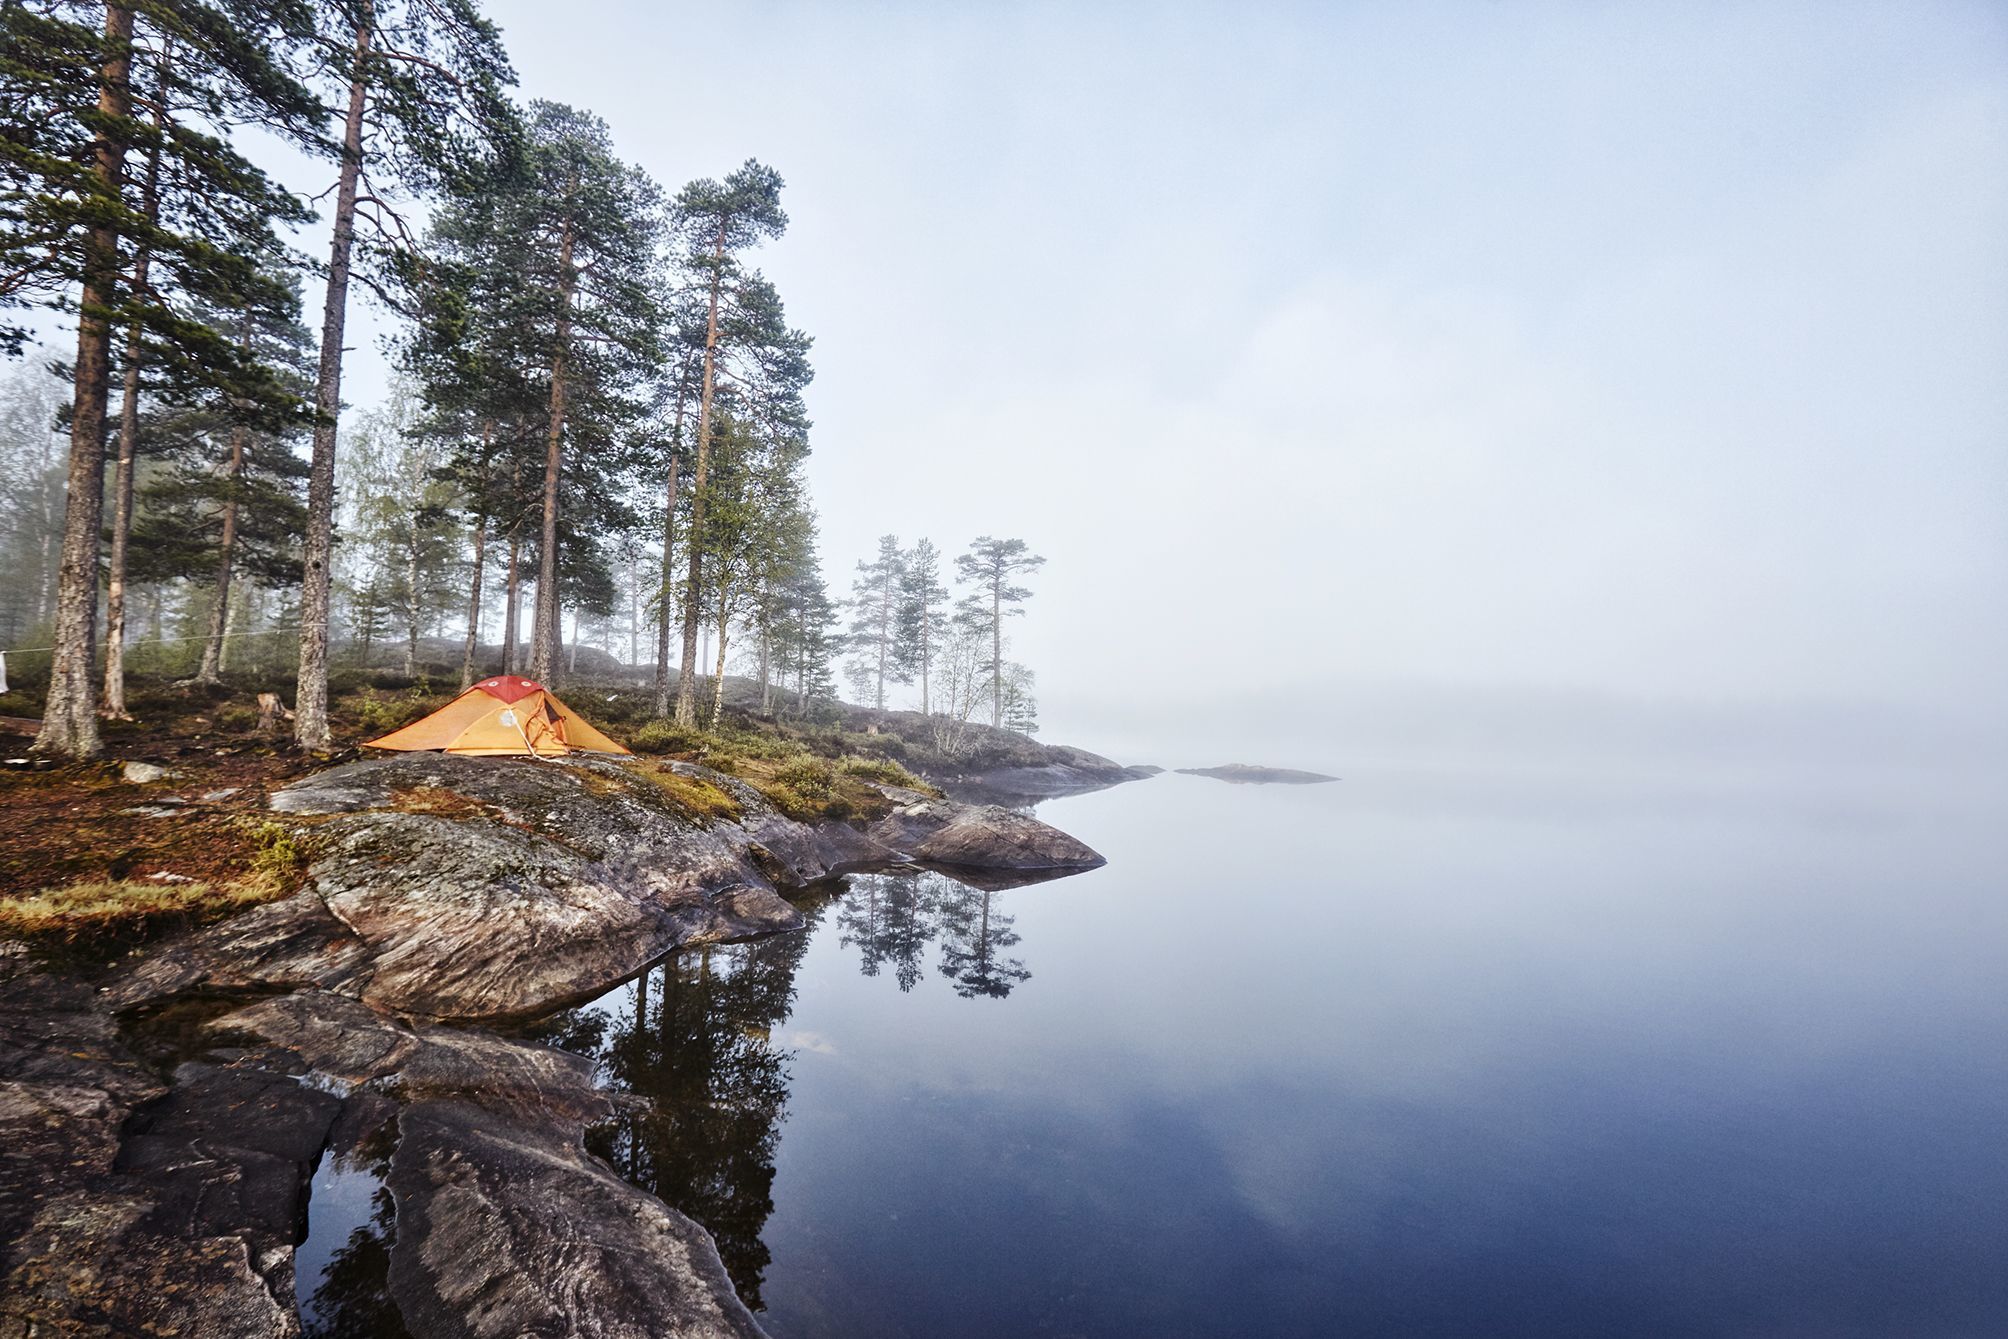 Tent perched ontop of a rock under a group of pine trees next to a lake in Norway